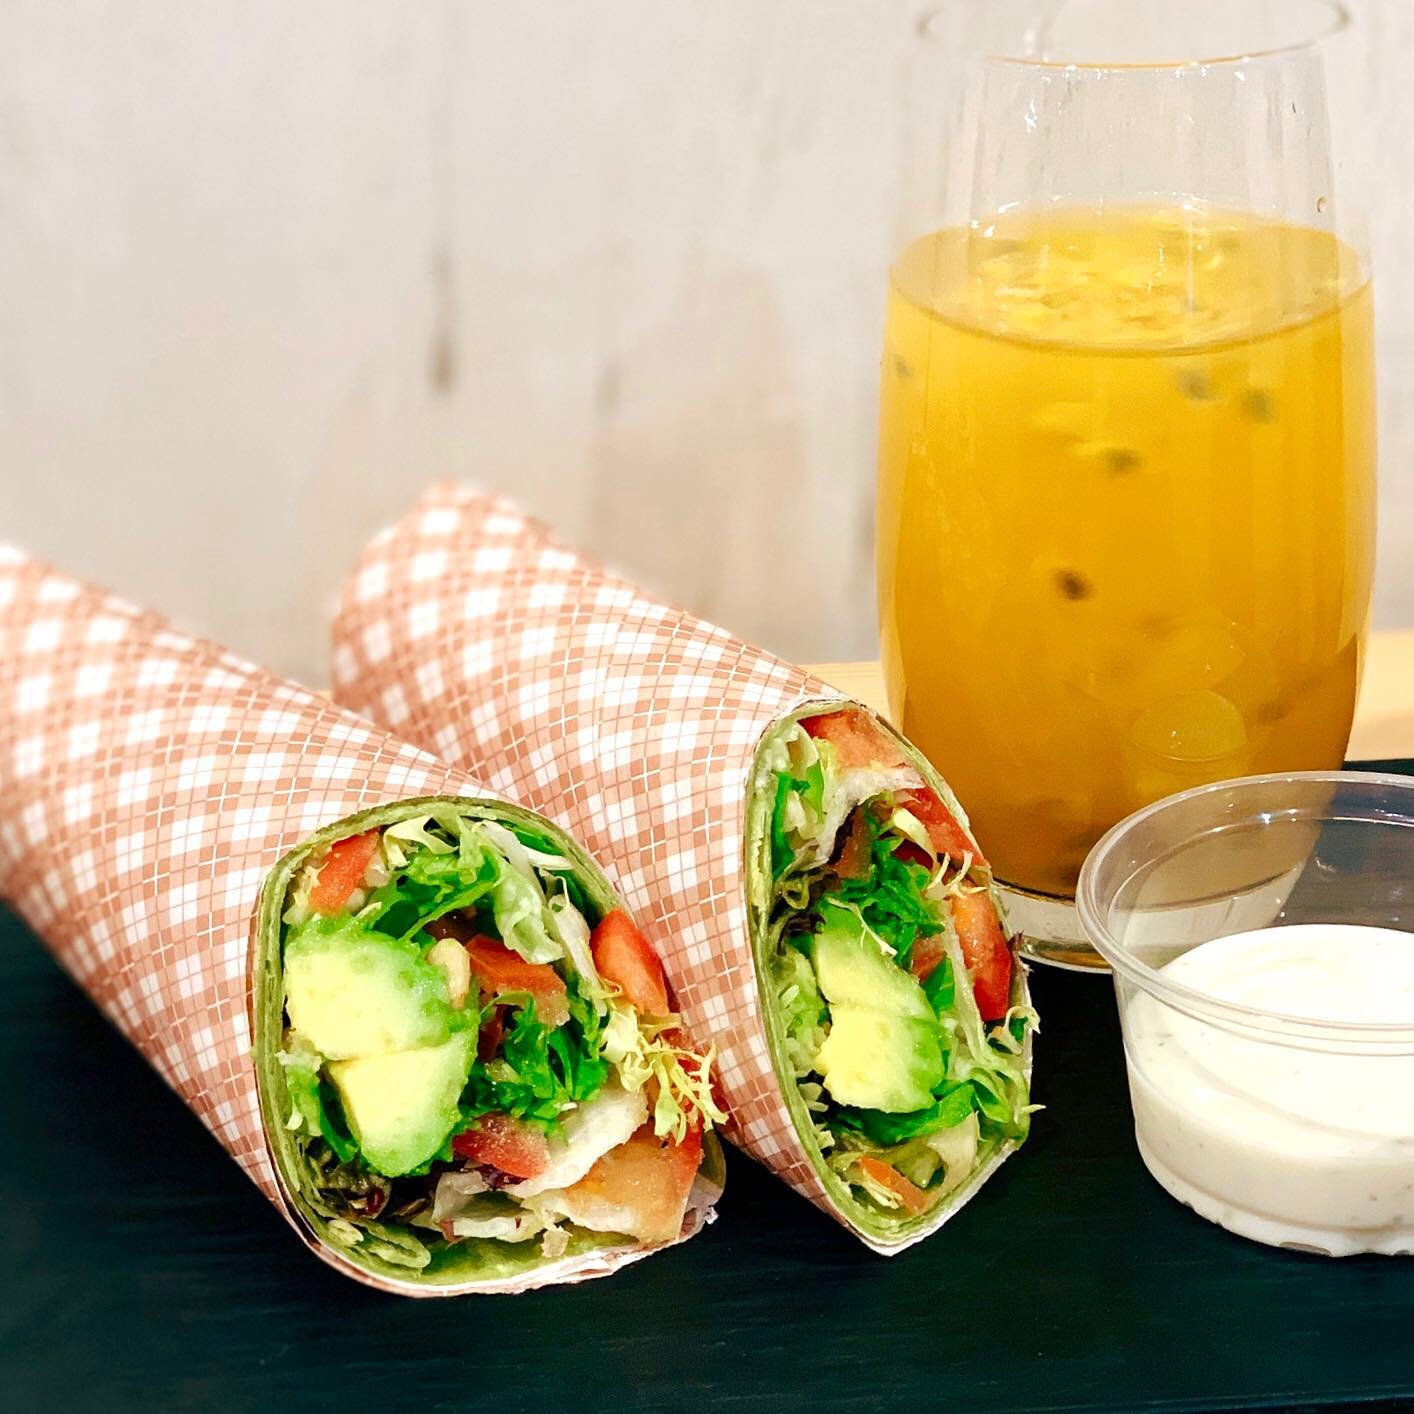 Lack of appetite due to the hot weather today? Go grab our cool and nutritious avocado rocket wrap set with a refreshing juice of your choice! #rejuvenateyourskin #nourishyourbody #applecucumberjuice #freshjuice #realfruitsmoothie #freshfruittea #swe